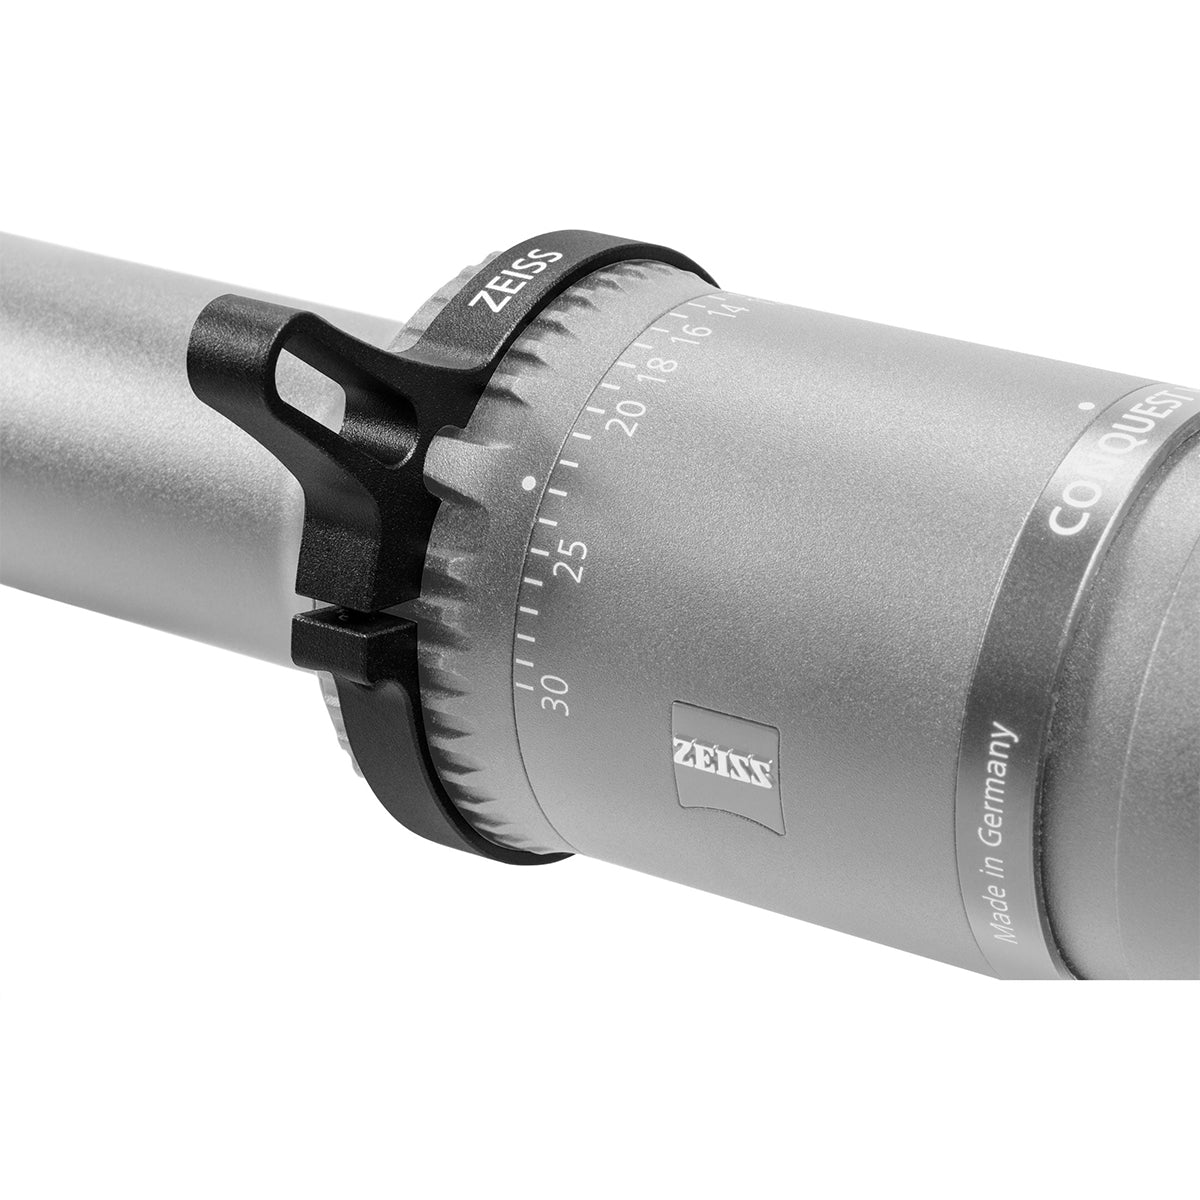 Zeiss Conquest V6 Throw Lever in Zeiss Conquest V6 Throw Lever by Zeiss | Optics - goHUNT Shop by GOHUNT | Zeiss - GOHUNT Shop